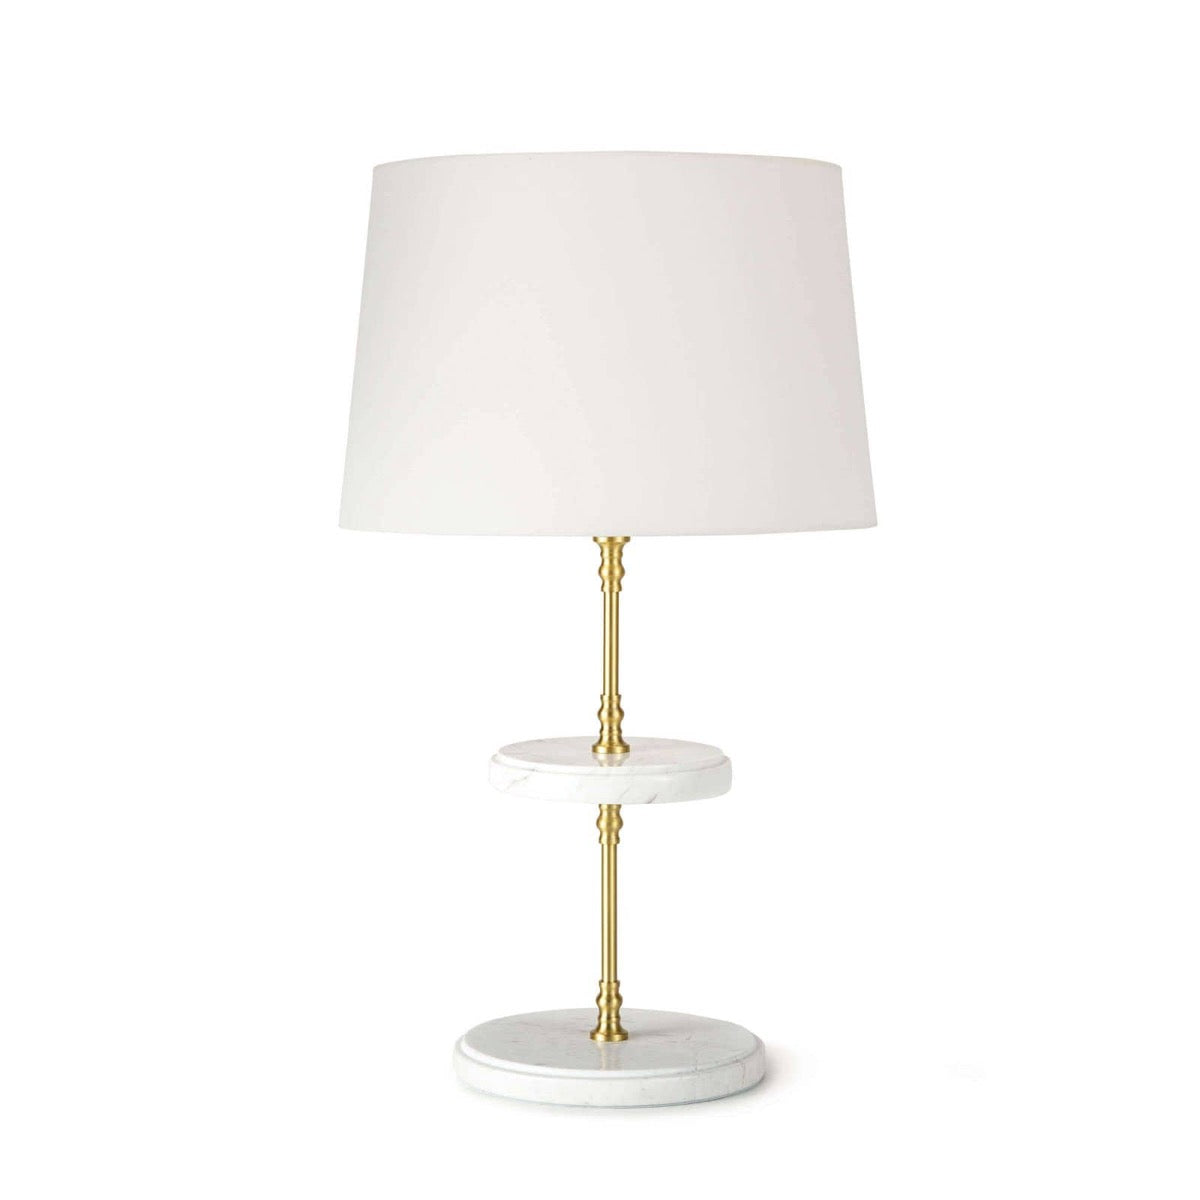 Marais Table Lamp Natural Brass. Front view.